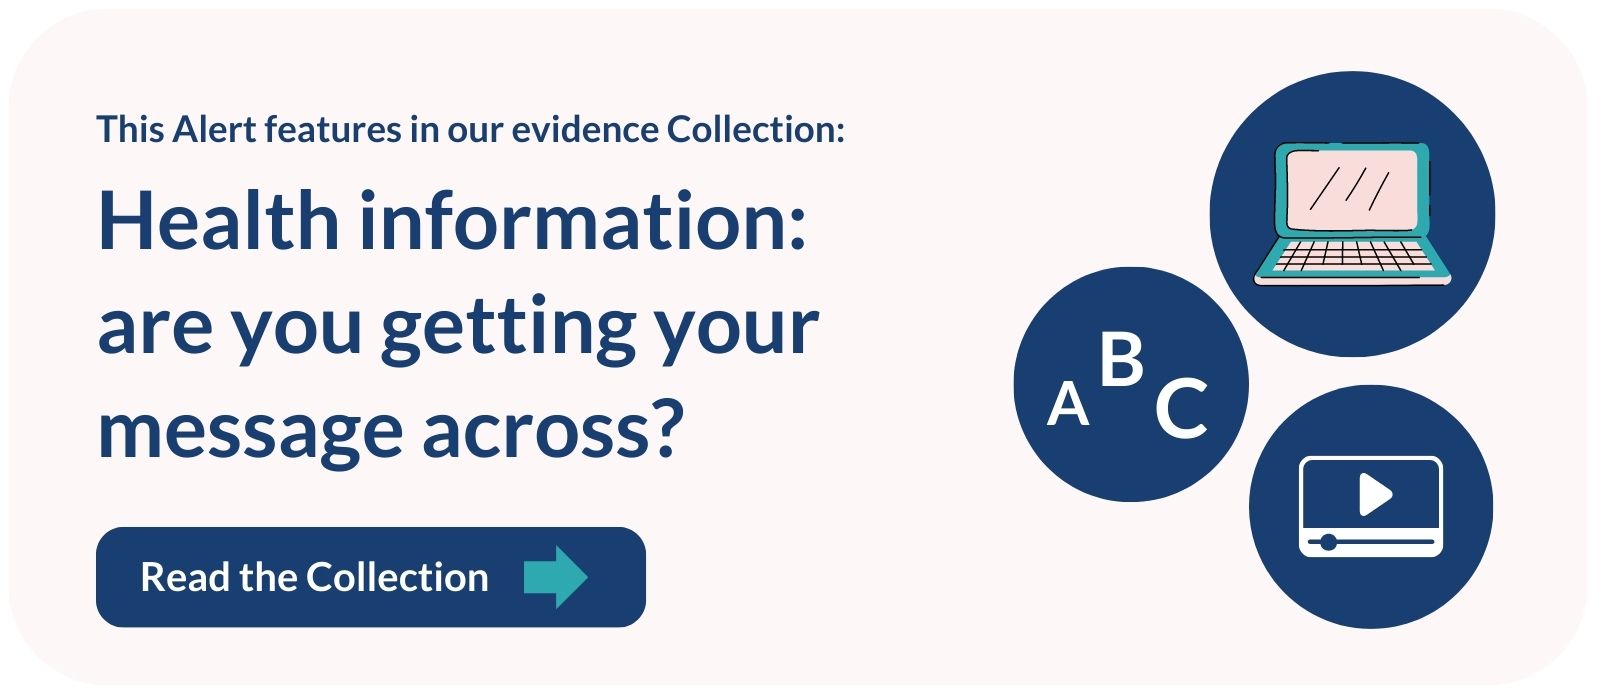 This Alert features in our Evidence Collection Health Information: are you getting your message across? Read the Collection?